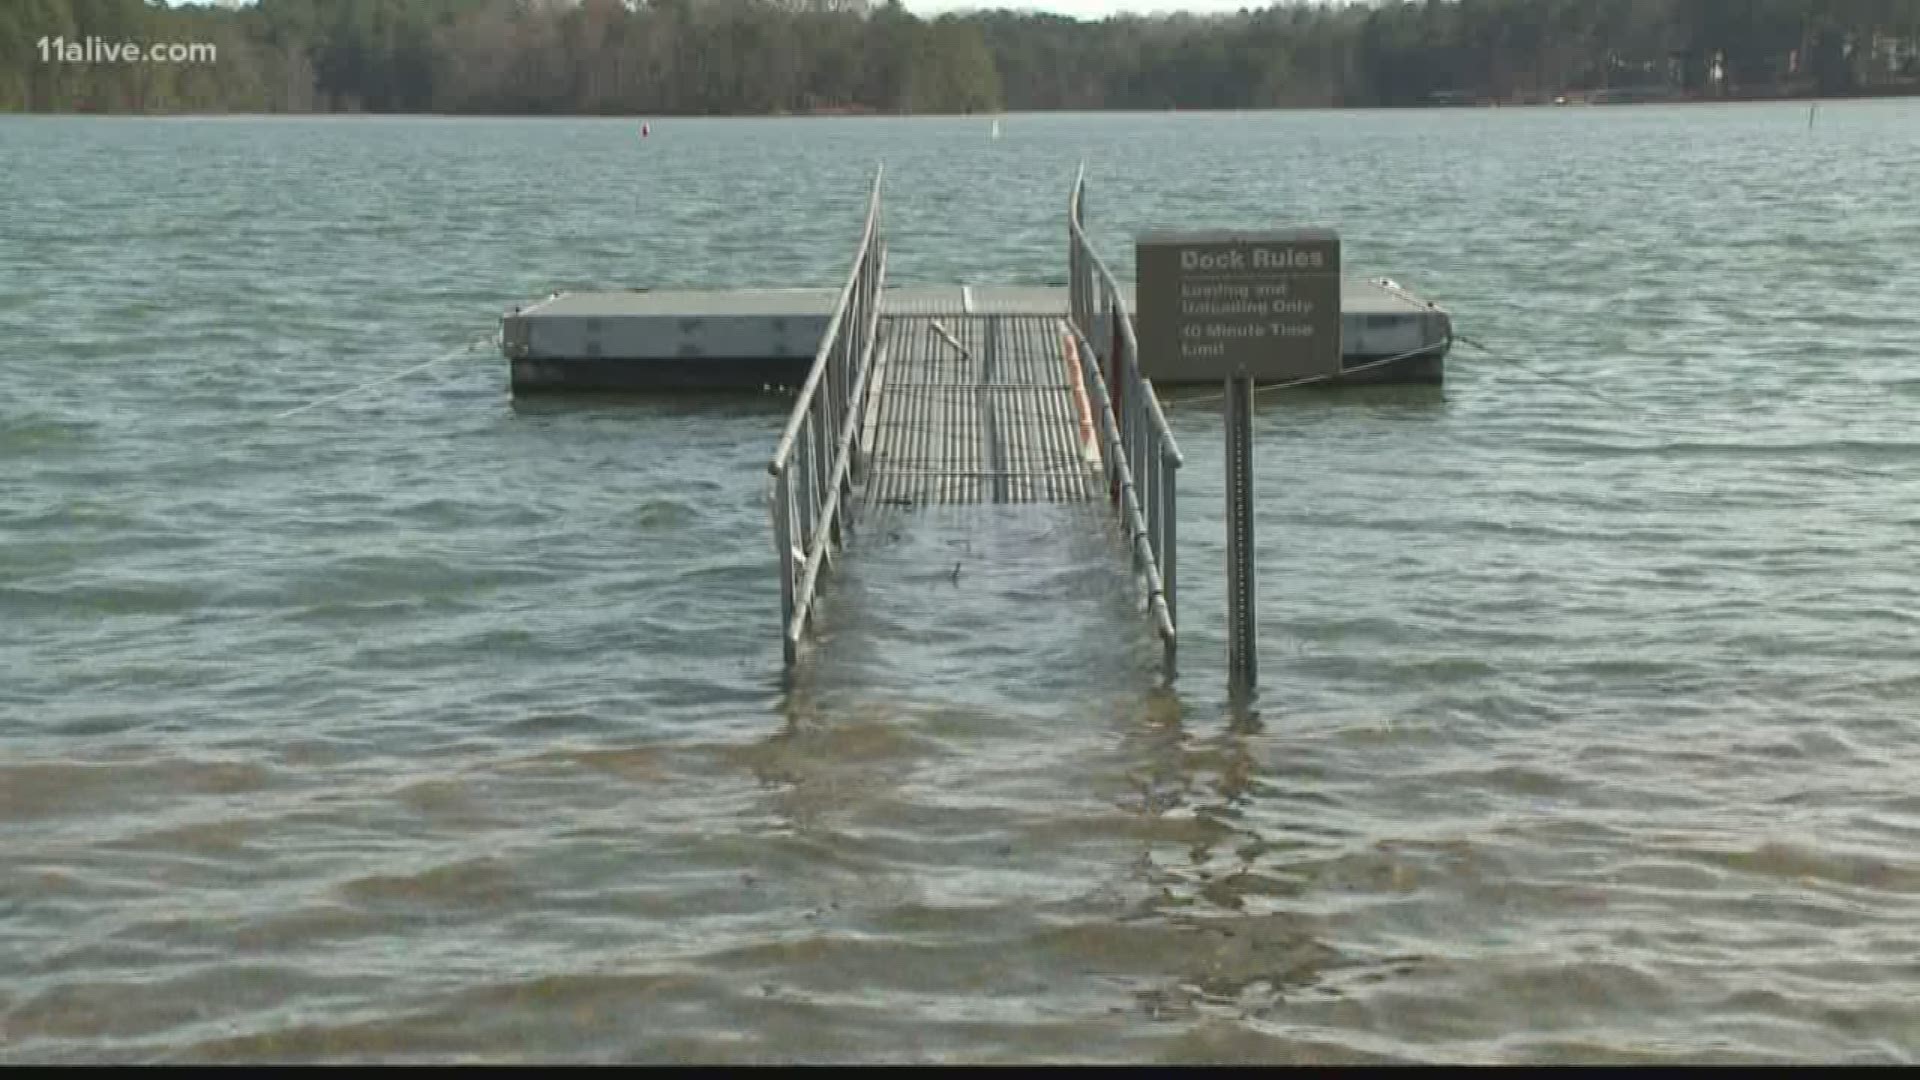 Only one time has the lake had a higher recorded level, in 1964.